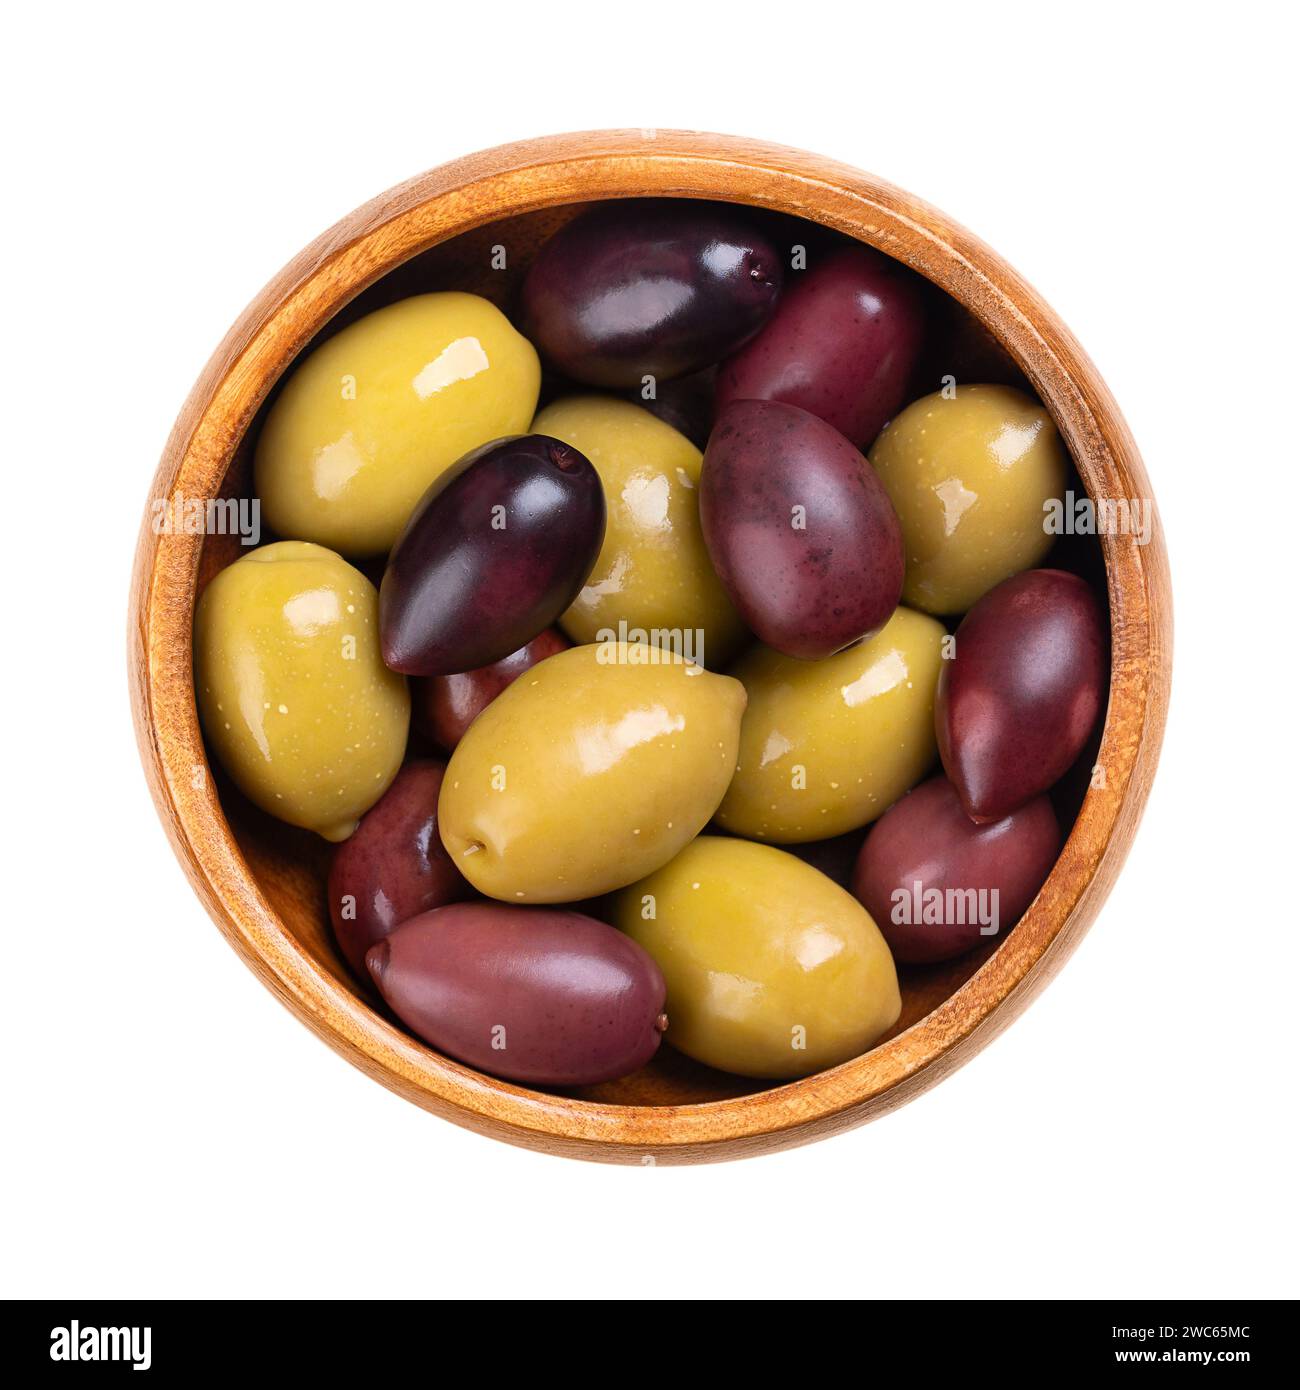 Kalamata and green olives with pit, pickled whole, large Greek table olives, in a wooden bowl. Stock Photo